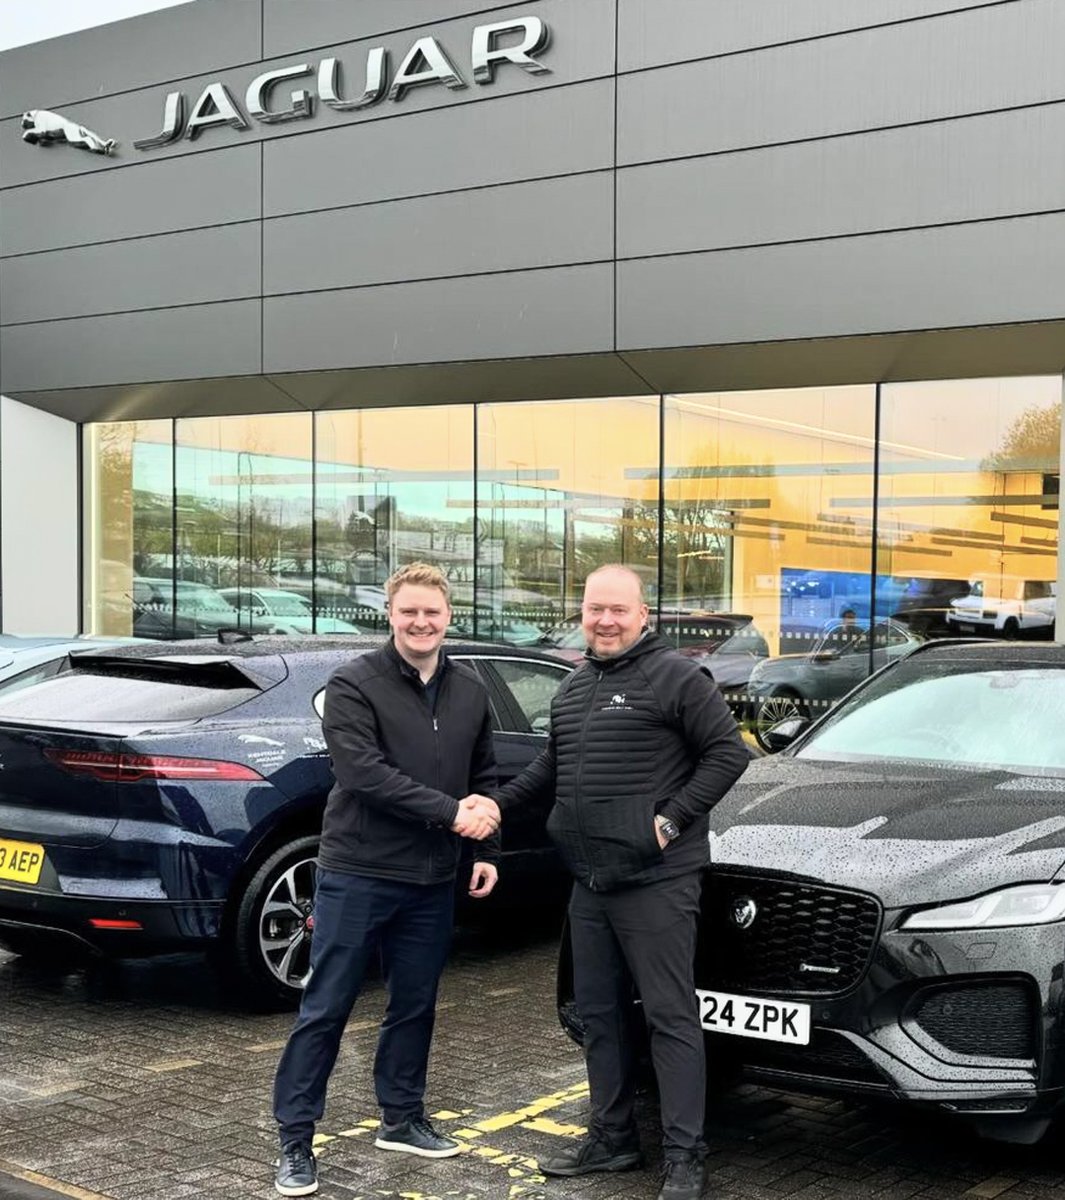 Congratulations to Andy Pickering on collecting his sleek new F-PACE today.

Wishing you many memorable miles ahead.

@apickeringgolf

#fpace #newcarday